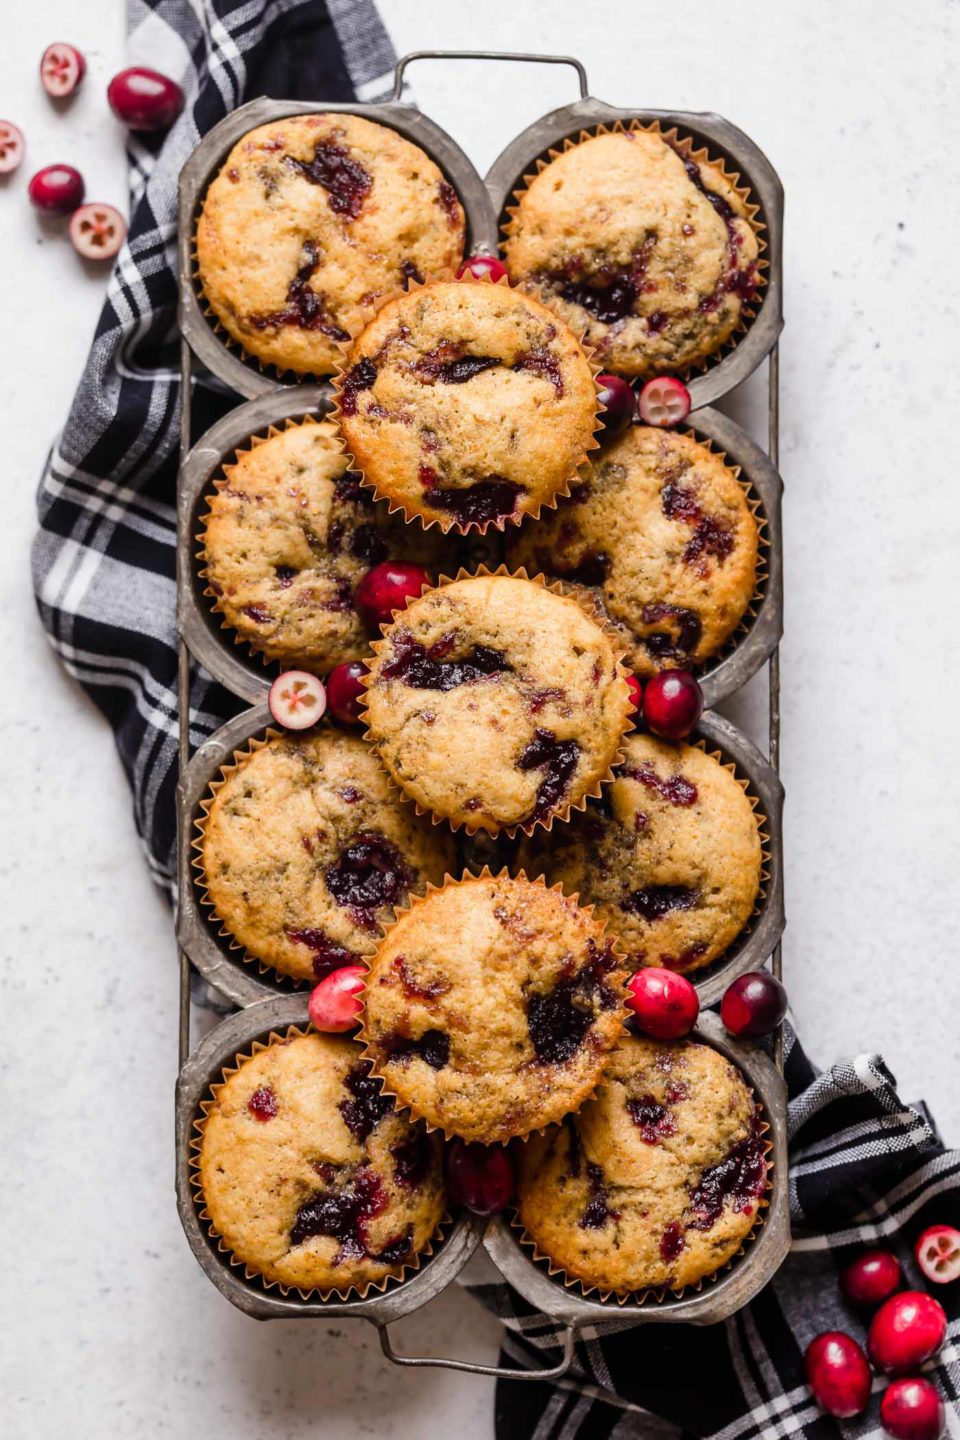 Cranberry cornbread muffins arranged in a vintage muffin pan. The muffin pan sits atop a black plaid linen napkin on a white surface, with some fresh cranberries scattered around it.